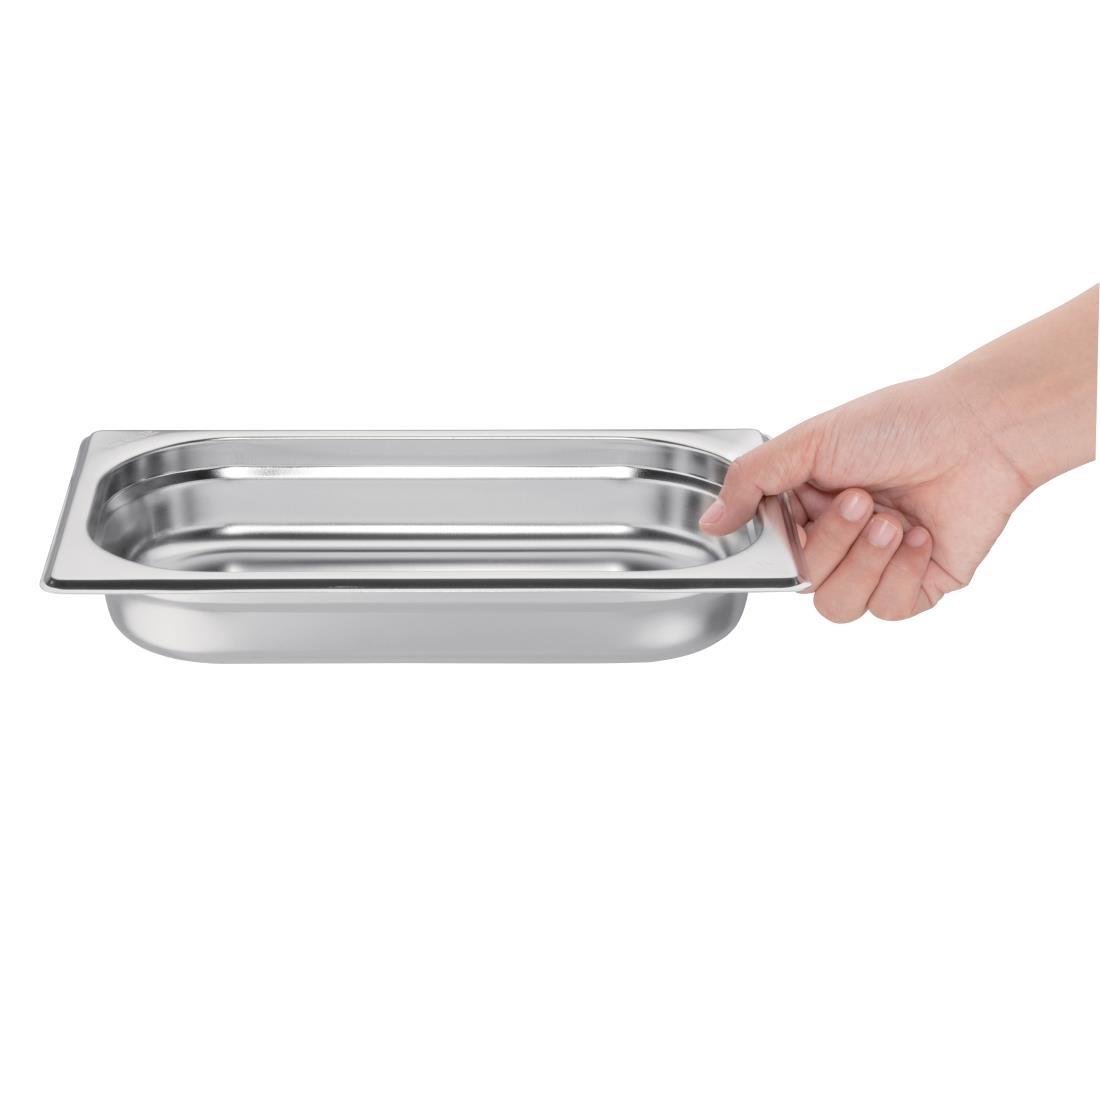 Vogue Stainless Steel 1/4 Gastronorm Pan 40mm - GM313  - 5